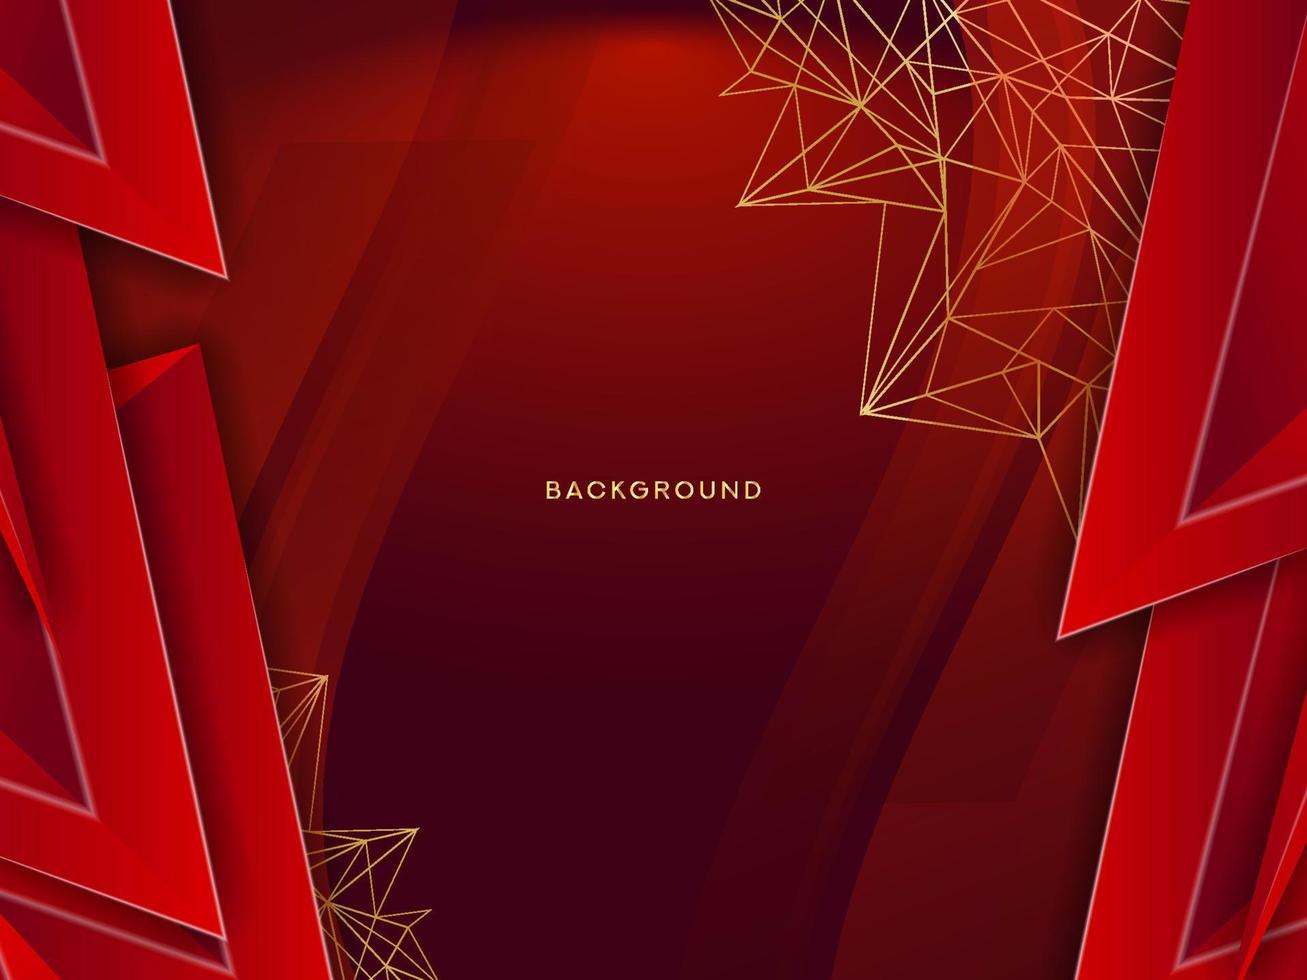 Red Background of Geometrical Elements vector